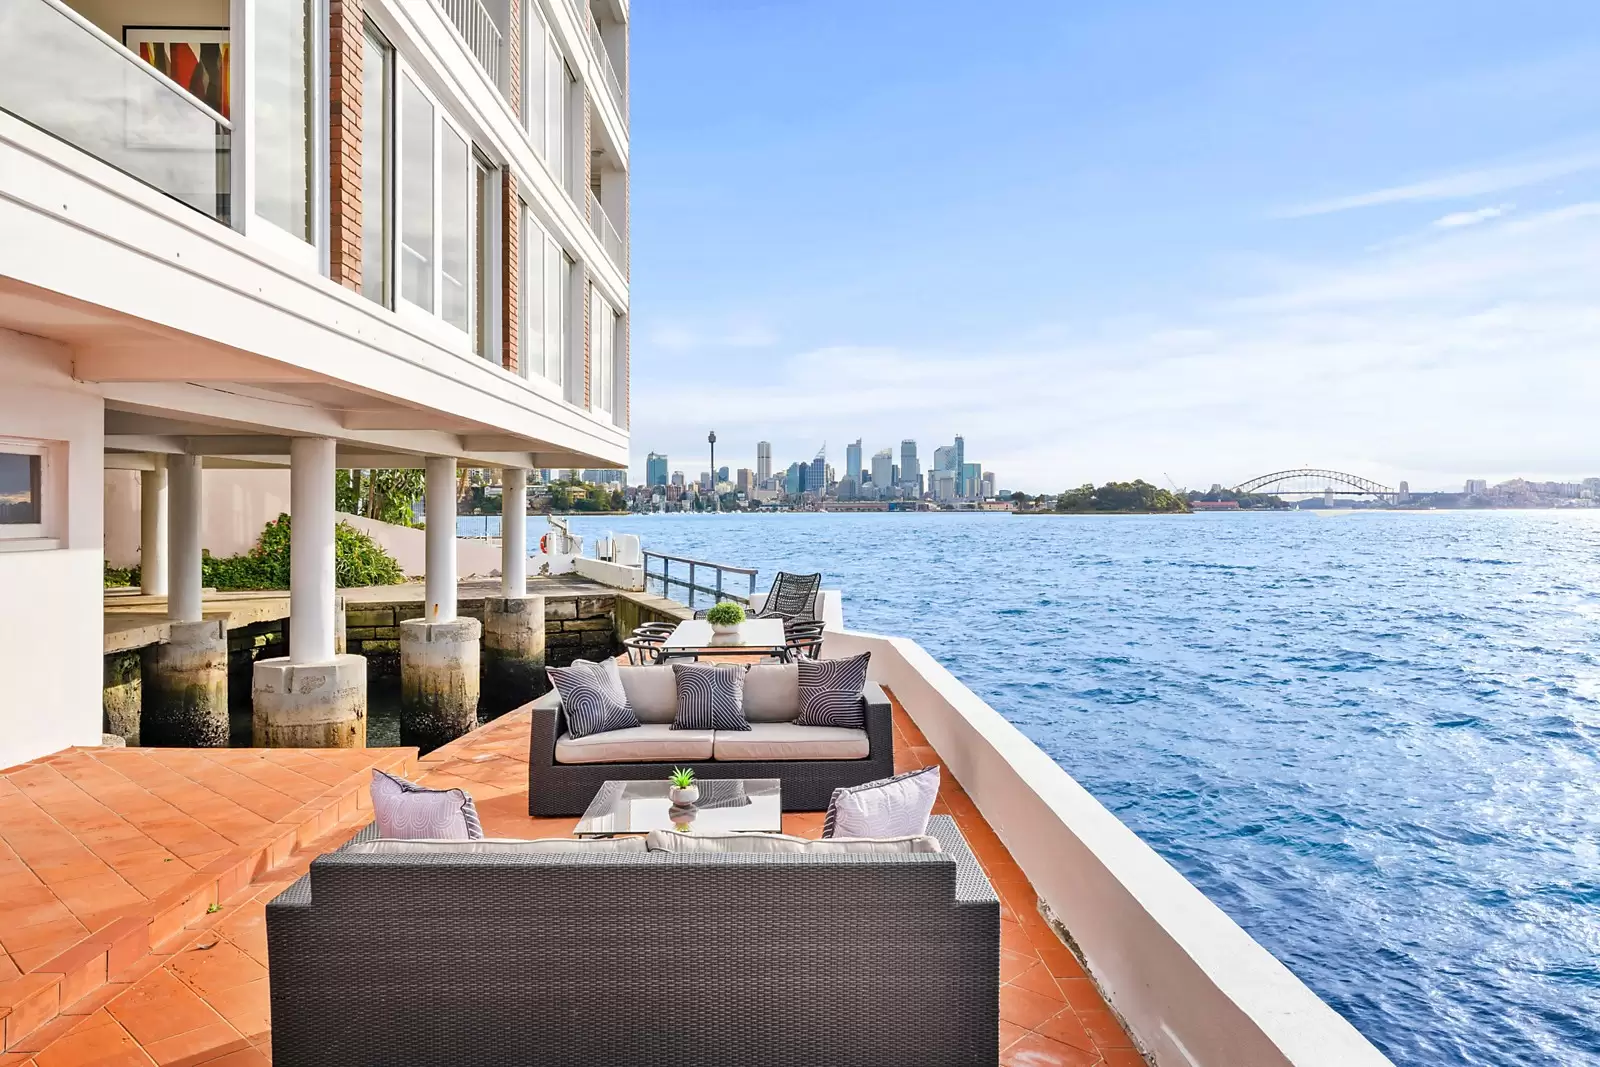 Photo #15: 2/126 Wolseley Road, Point Piper - Sold by Sydney Sotheby's International Realty